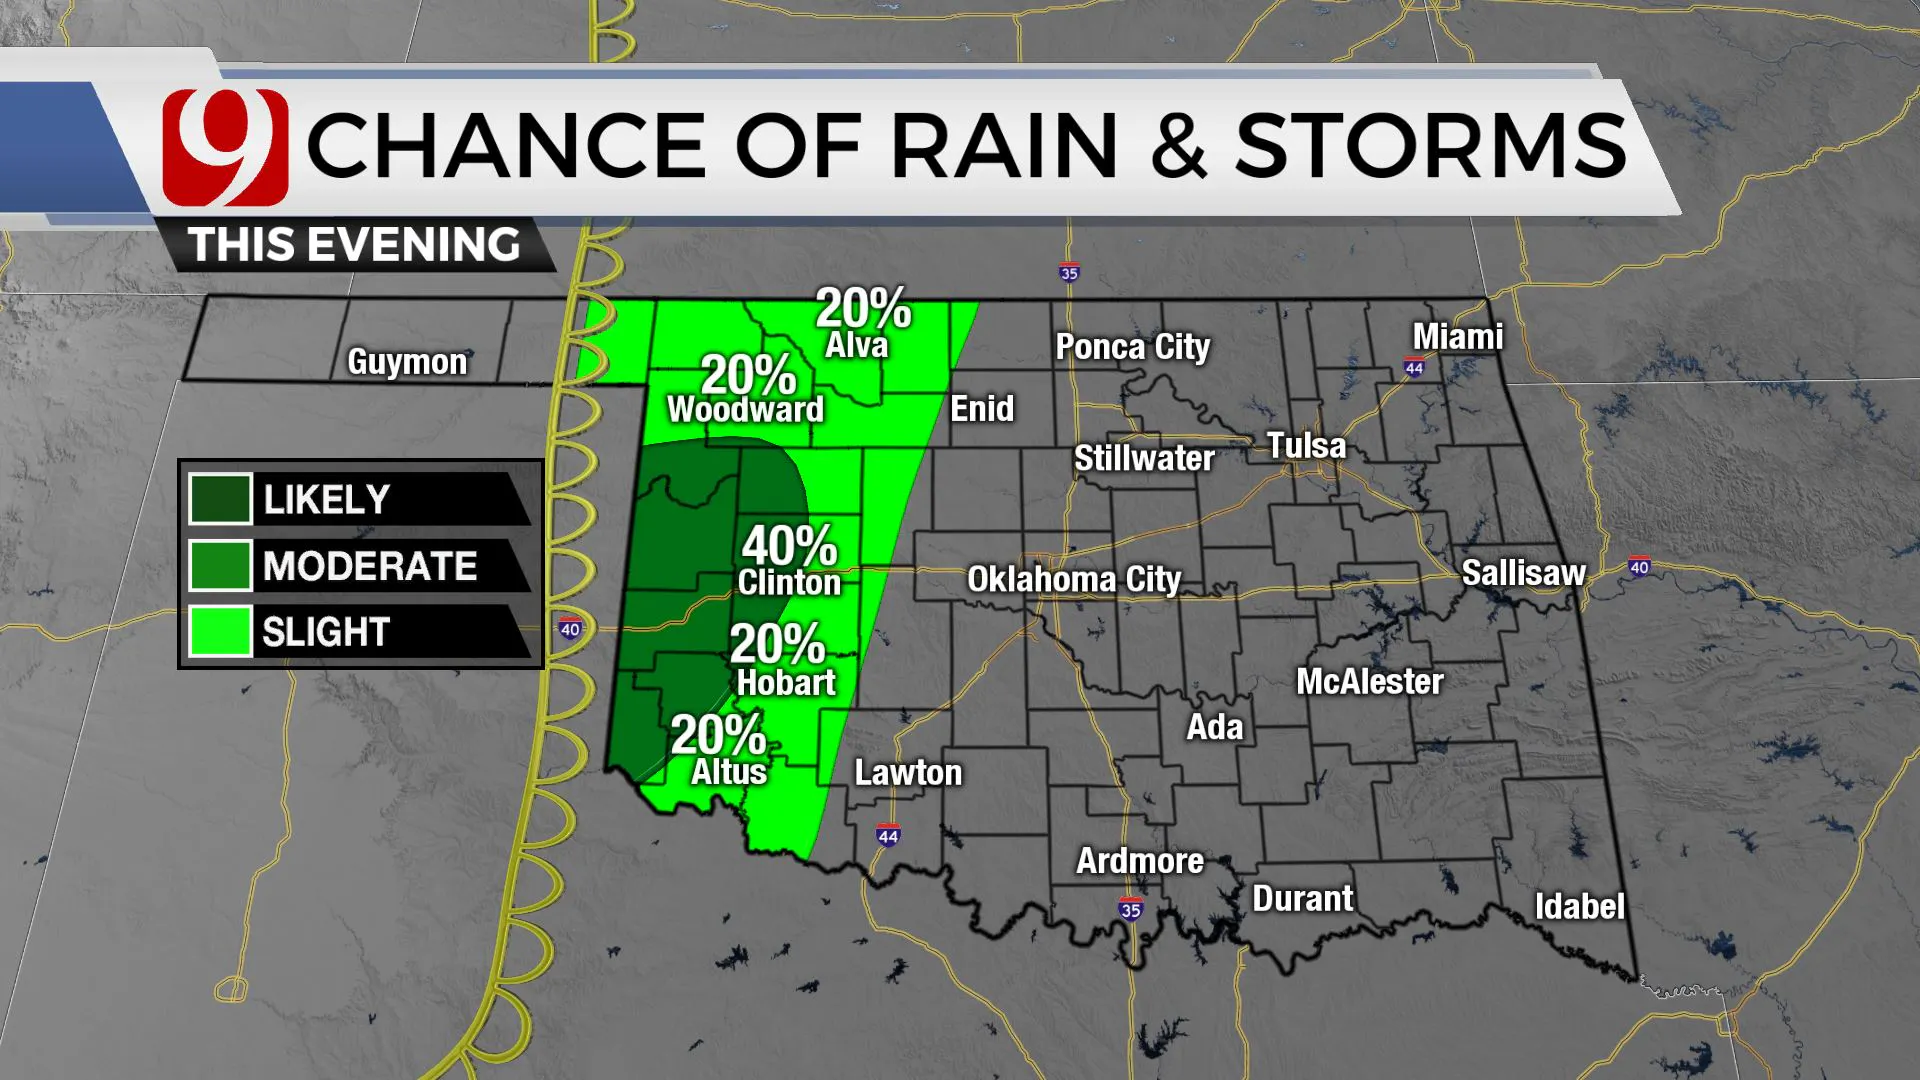 CHANCE OF RAN/STORMS